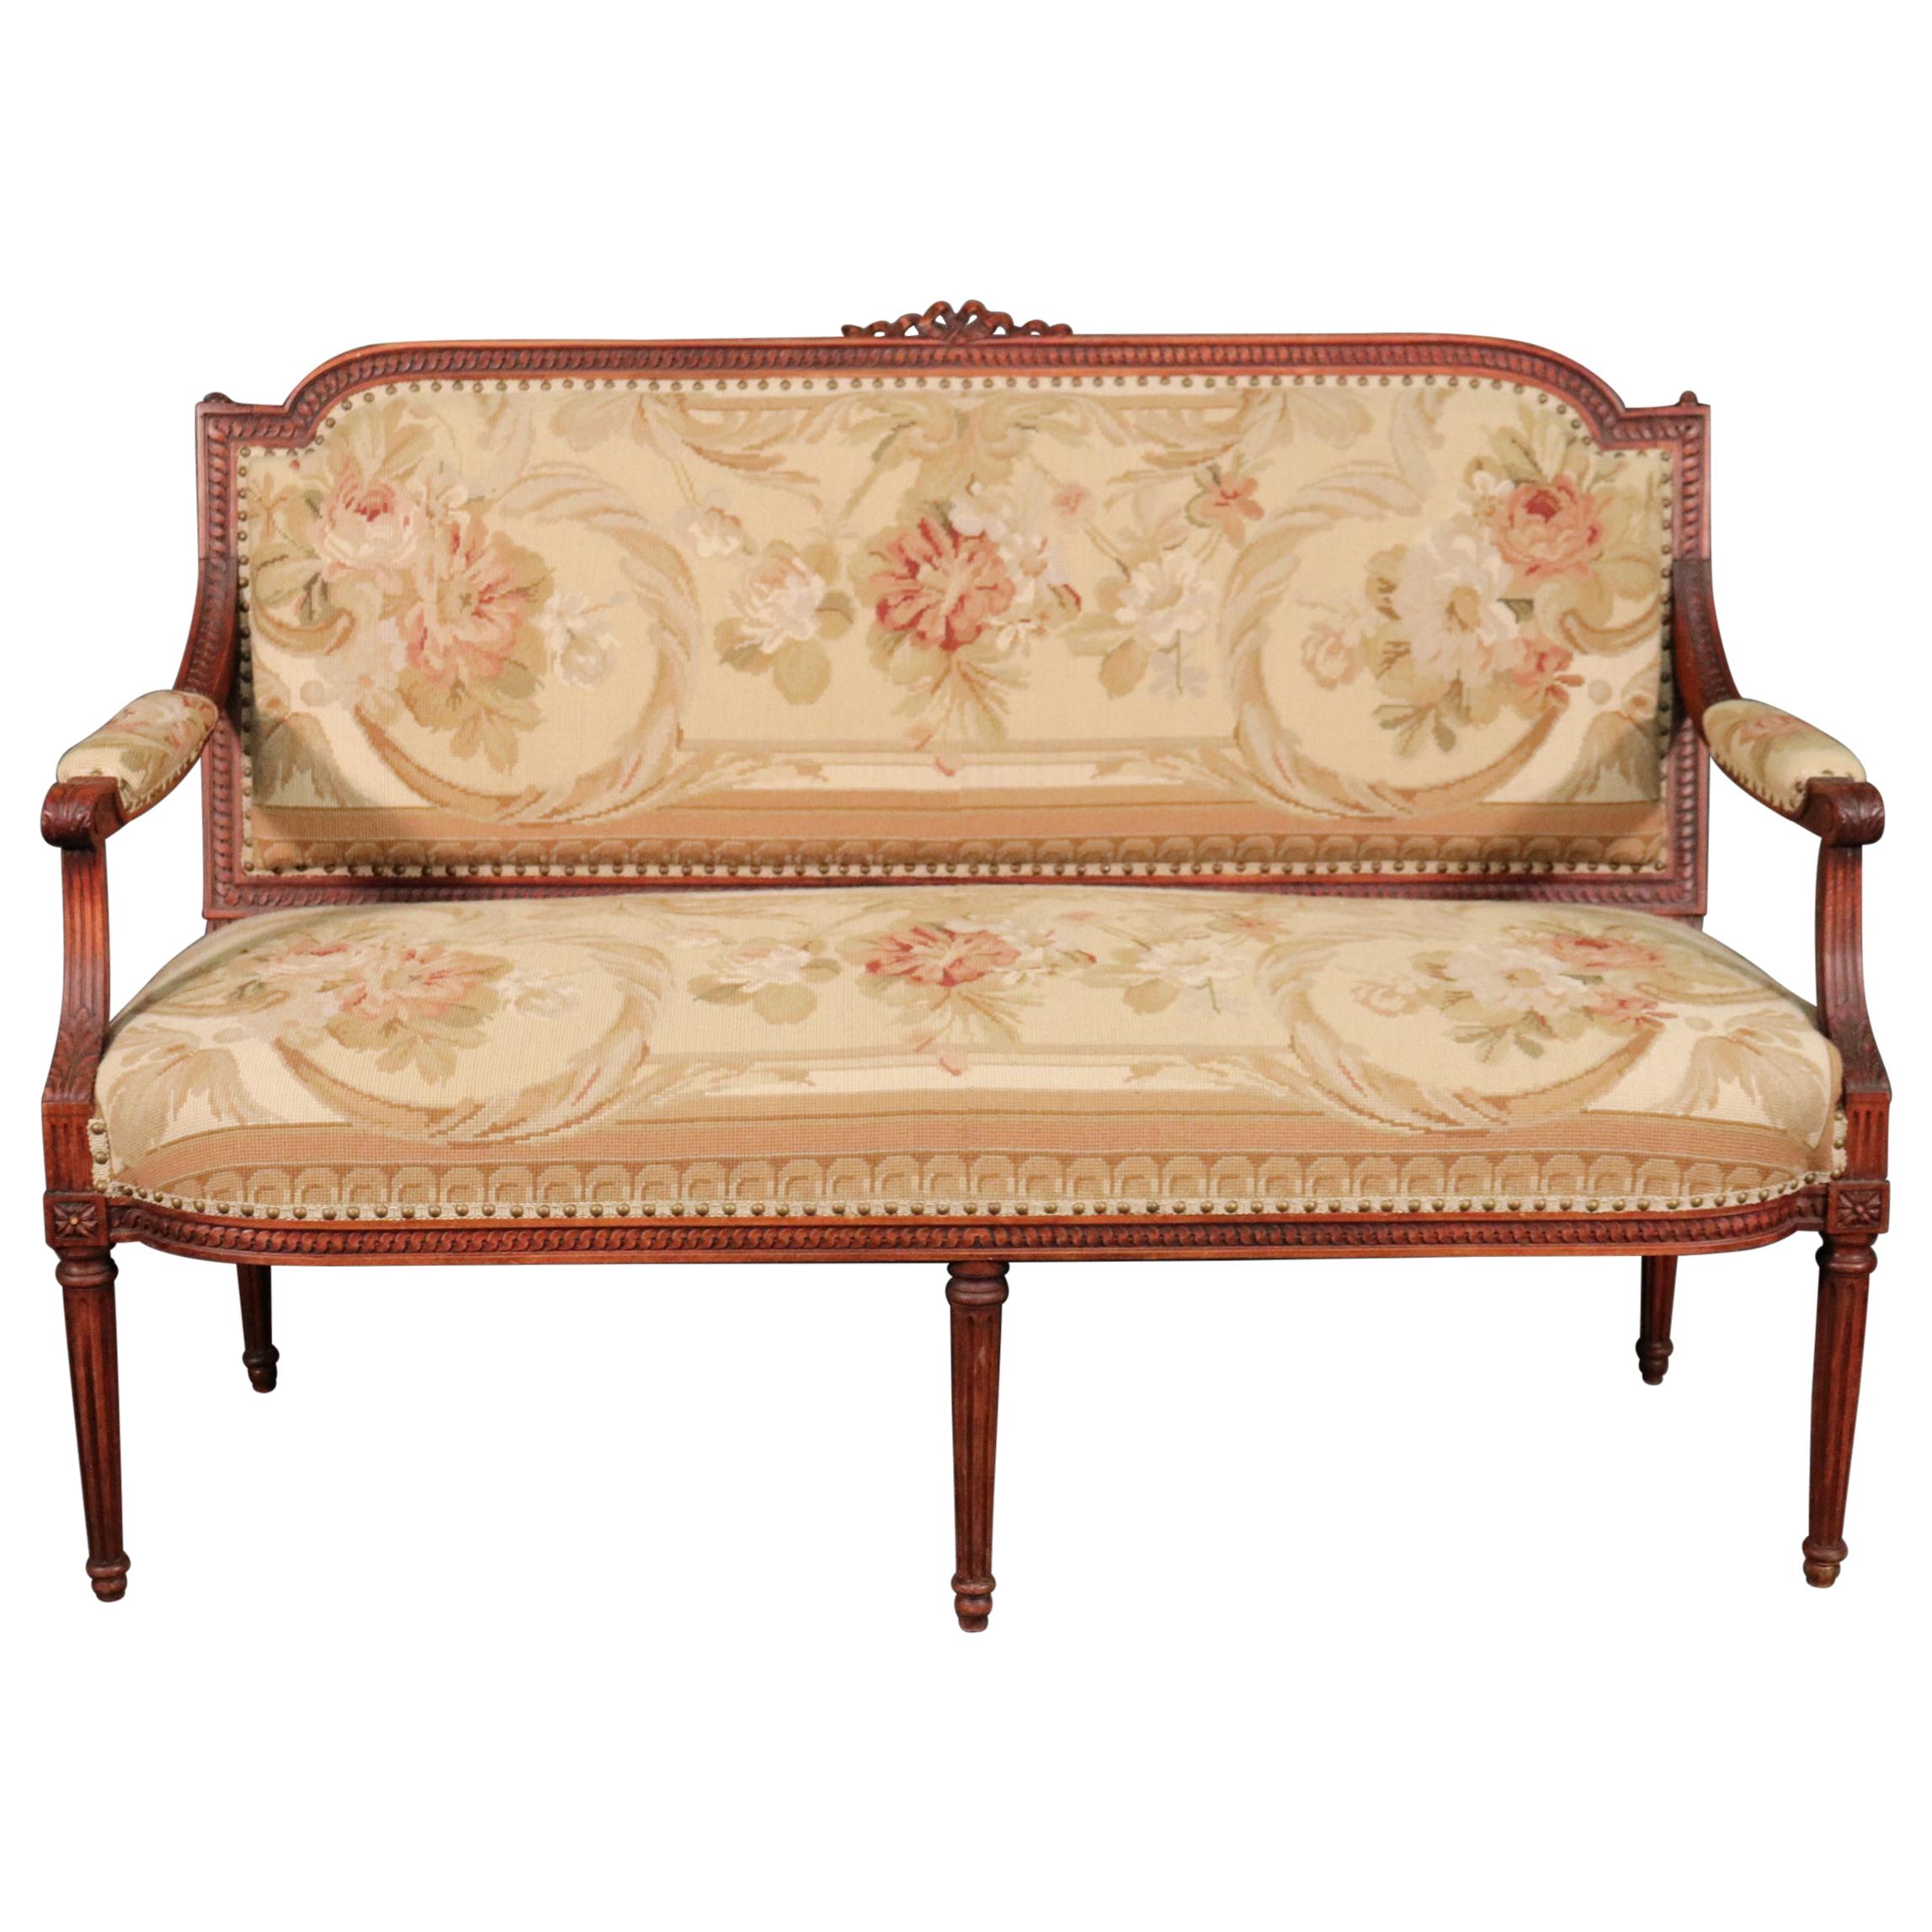 French Louis XVI Style Walnut Settee Canape with Tapestry Upholstery, circa 1930